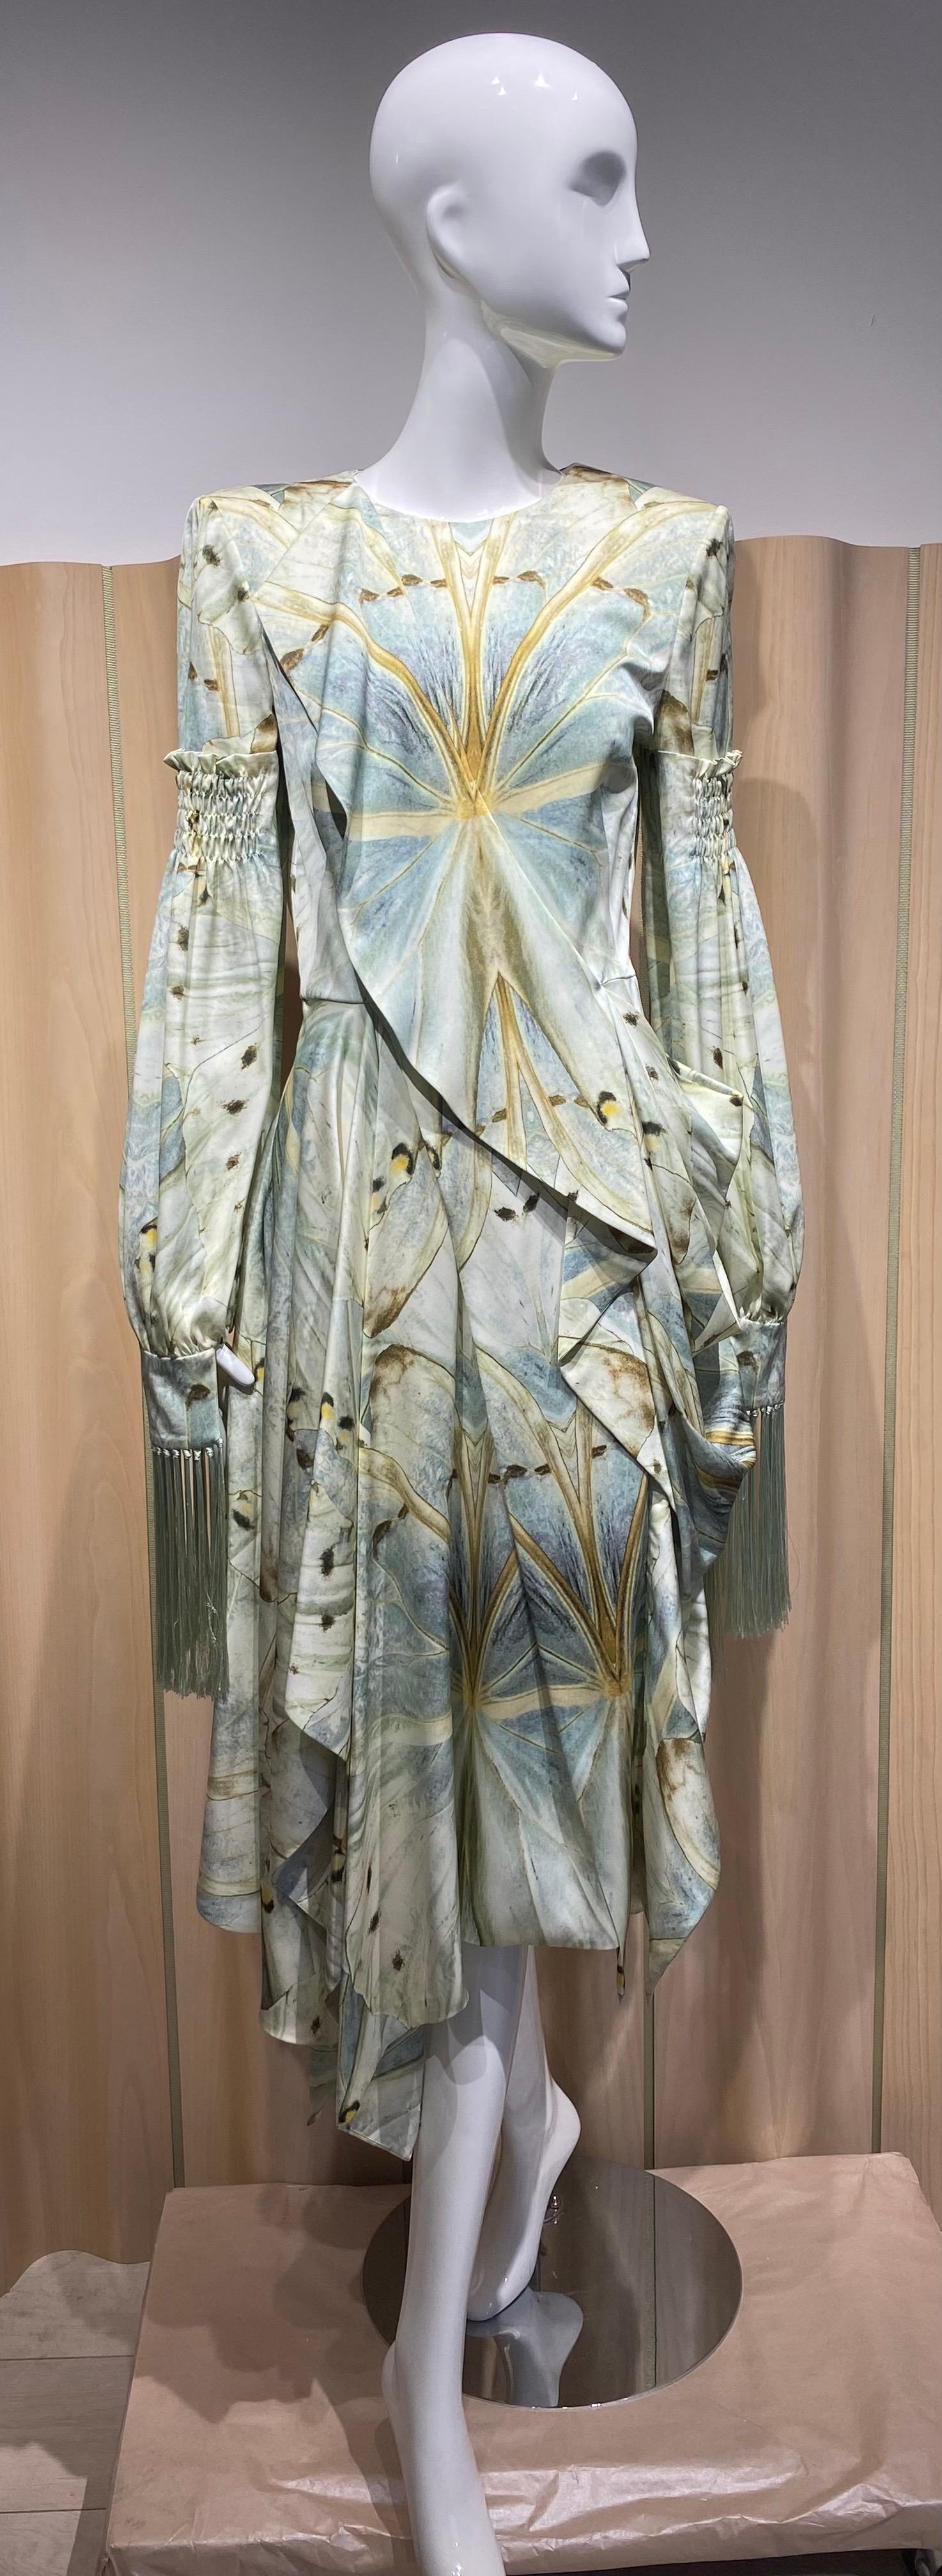 Alexander McQueen Long sleeves Silk Print Dress in light green and brown from Fall 2018
- tassel sleeves
Size Medium 6/8 see measurement :
Bust 36 inches
waist 28 inches/ dress length 54”
sleeve : 27 inches

